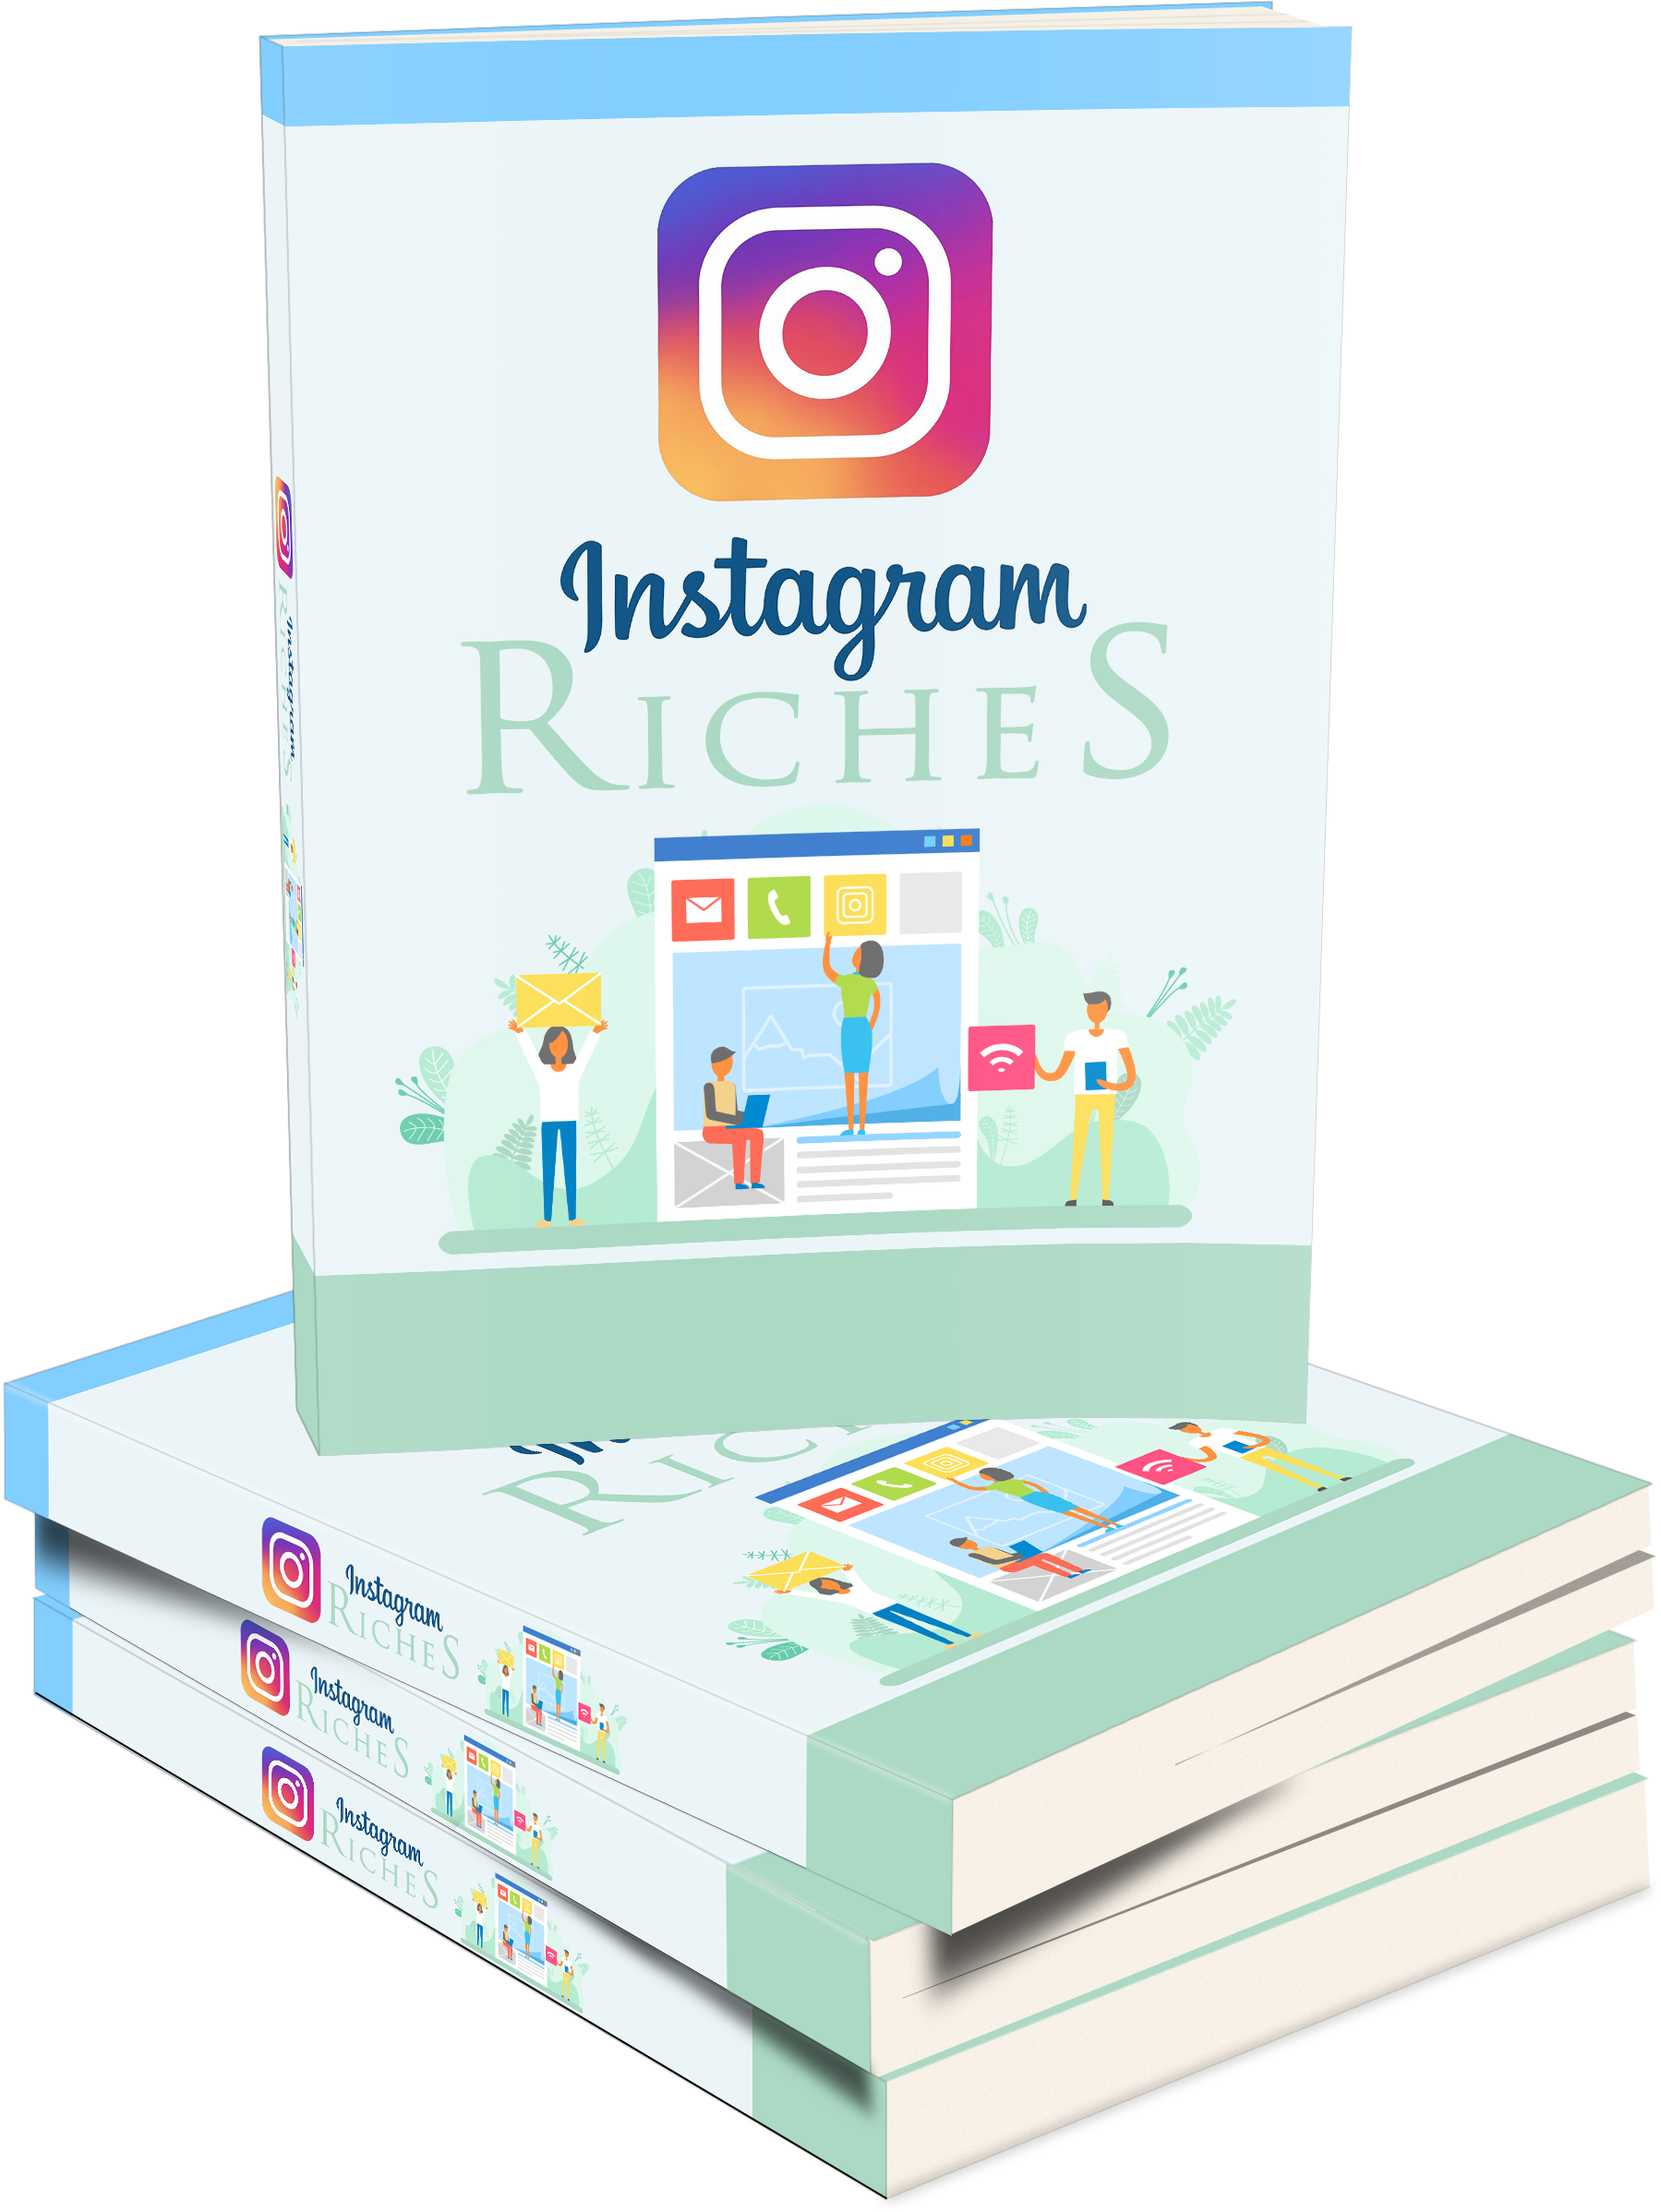 instagram-riches-pack-bigproductstore